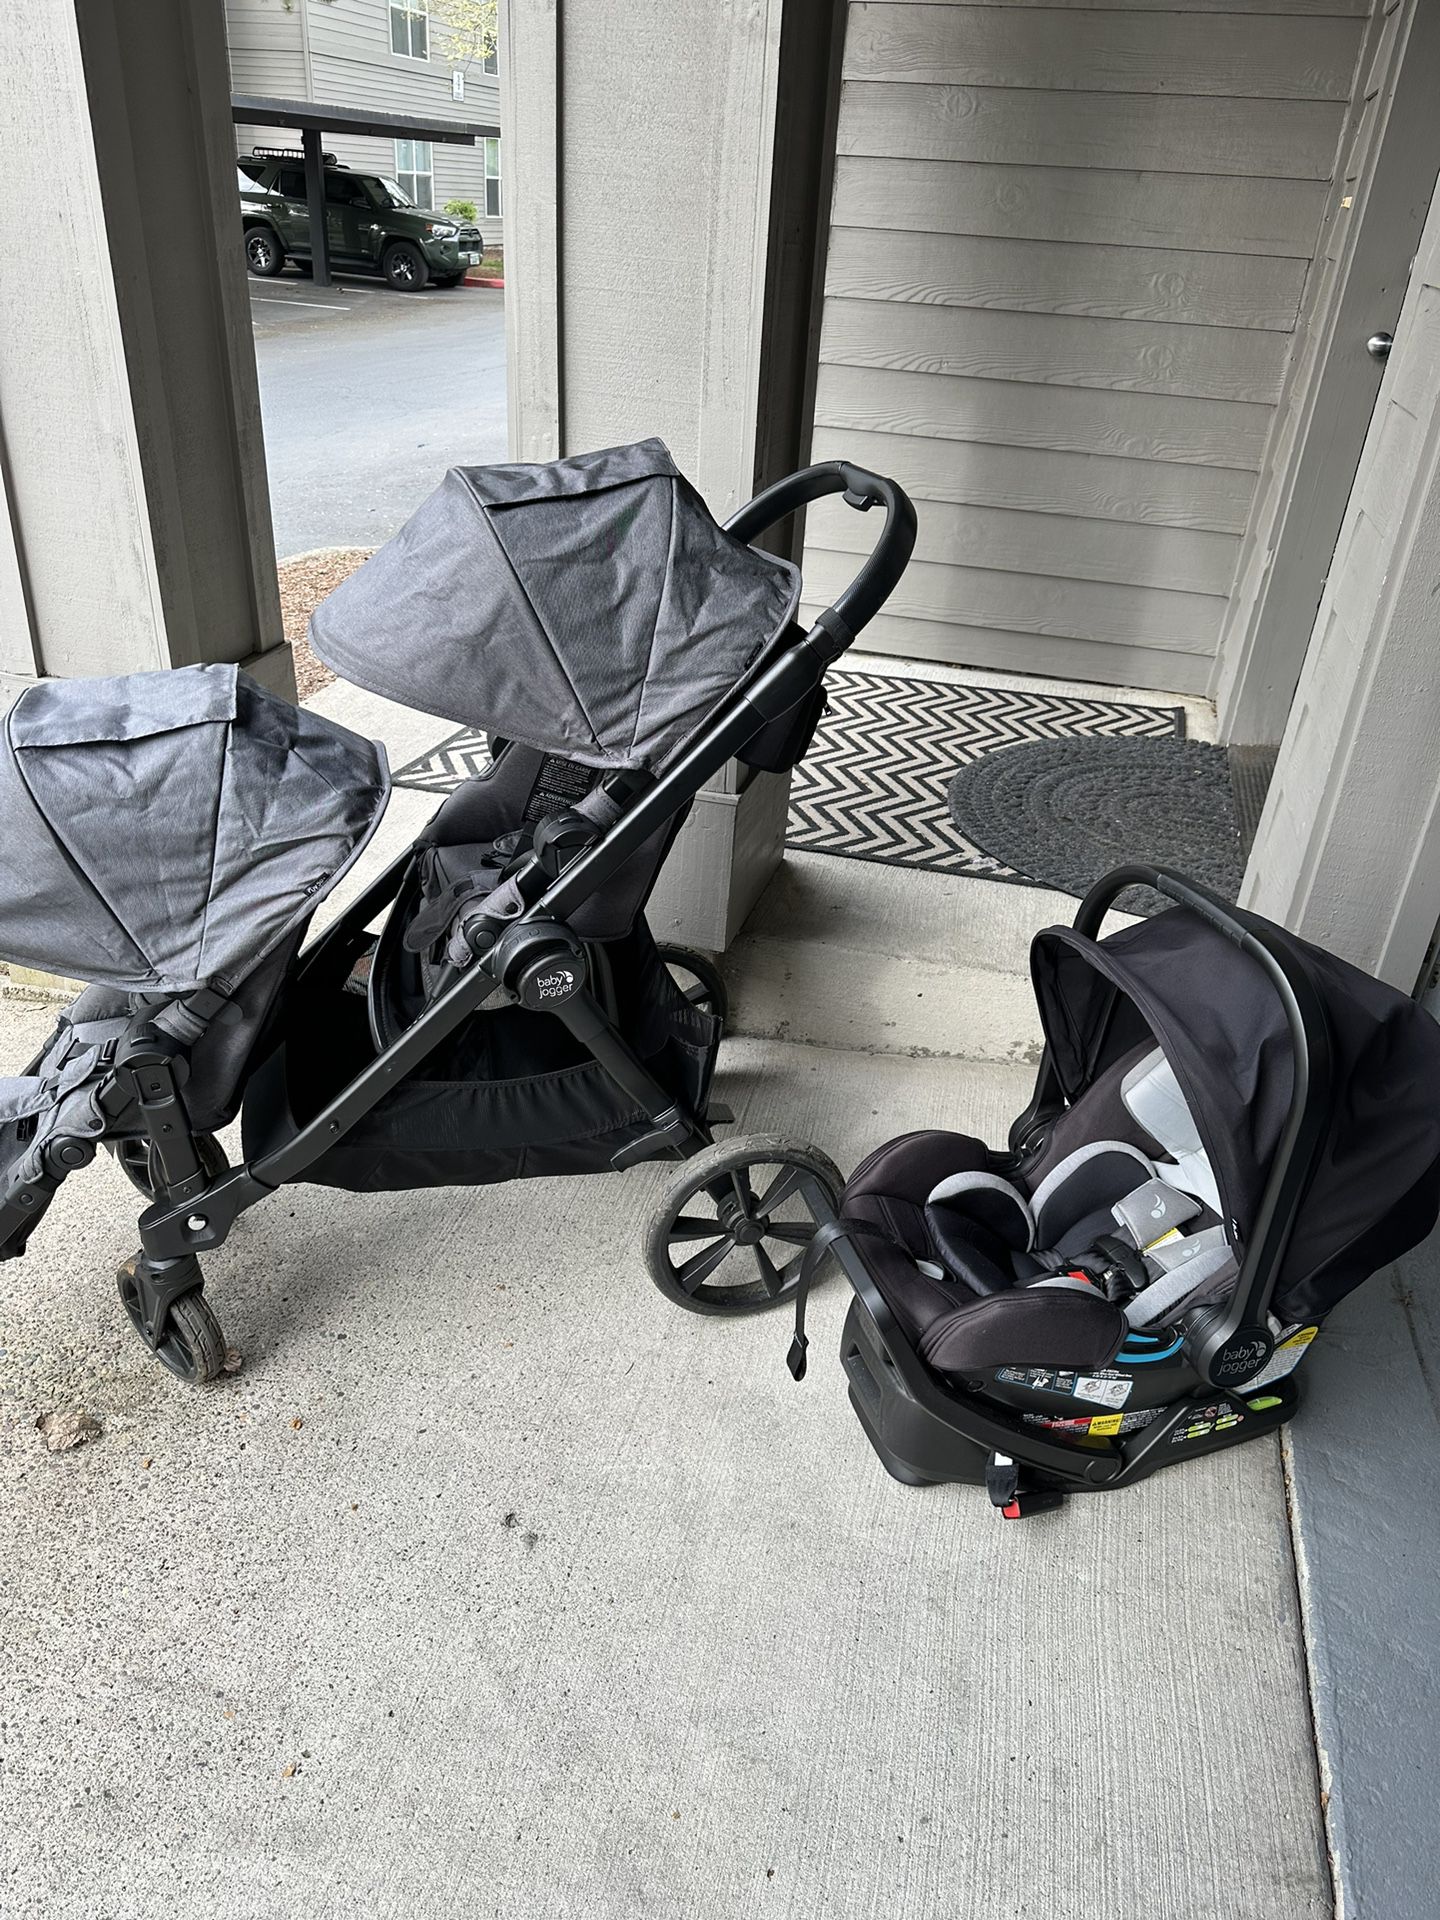 Baby Jogger City Select Travel System 